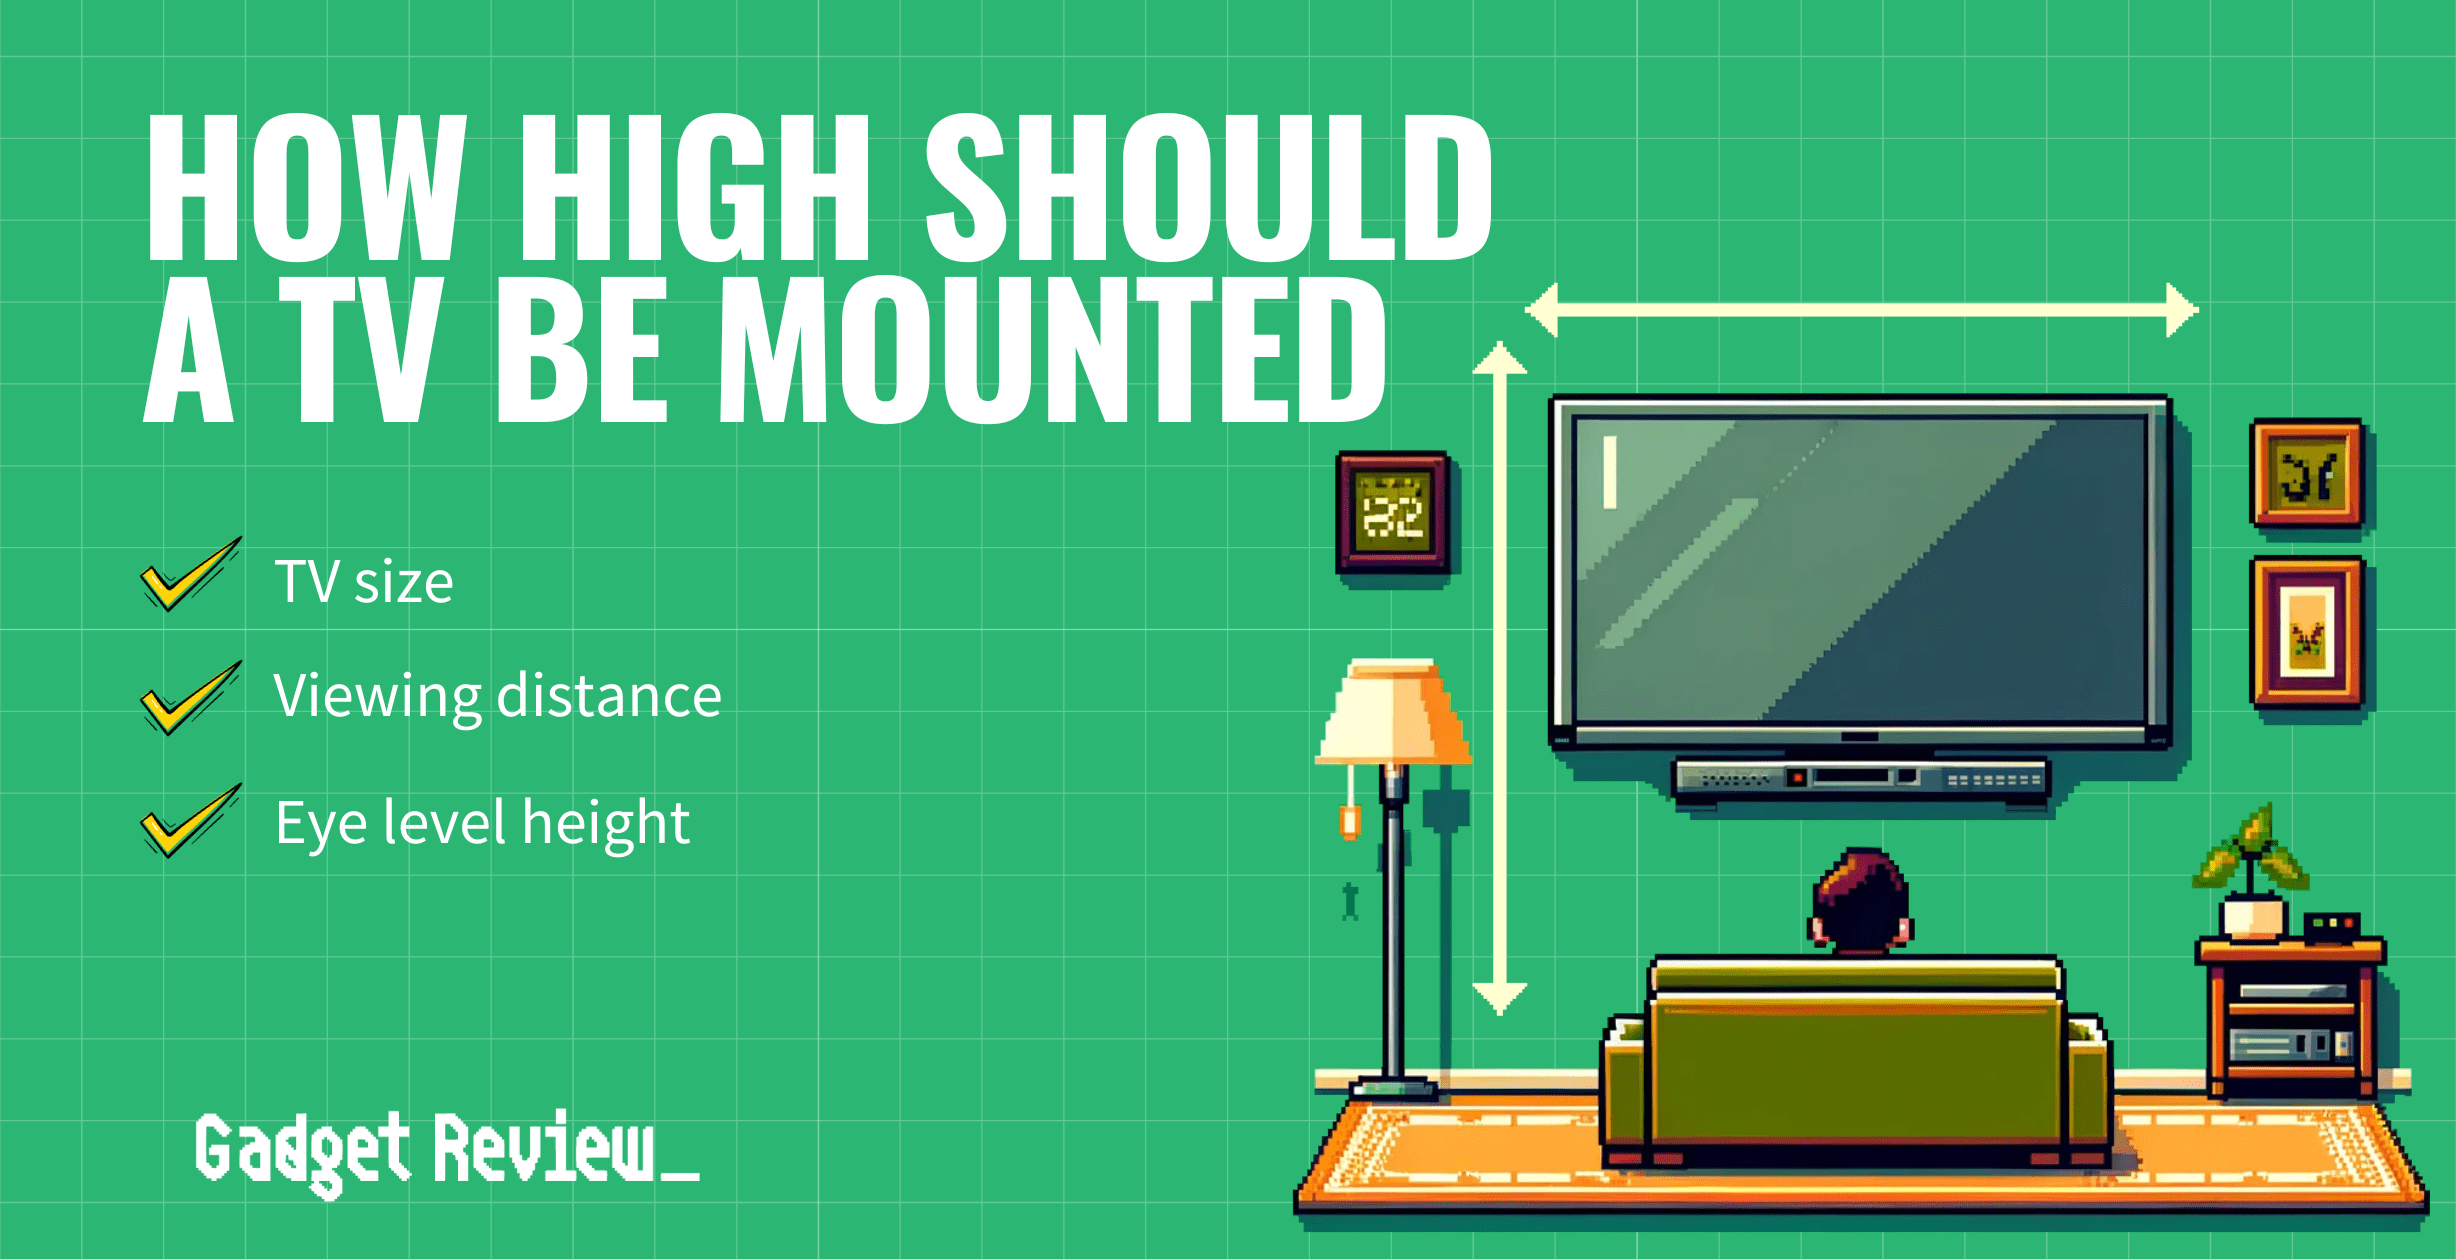 How High Should a TV be Mounted